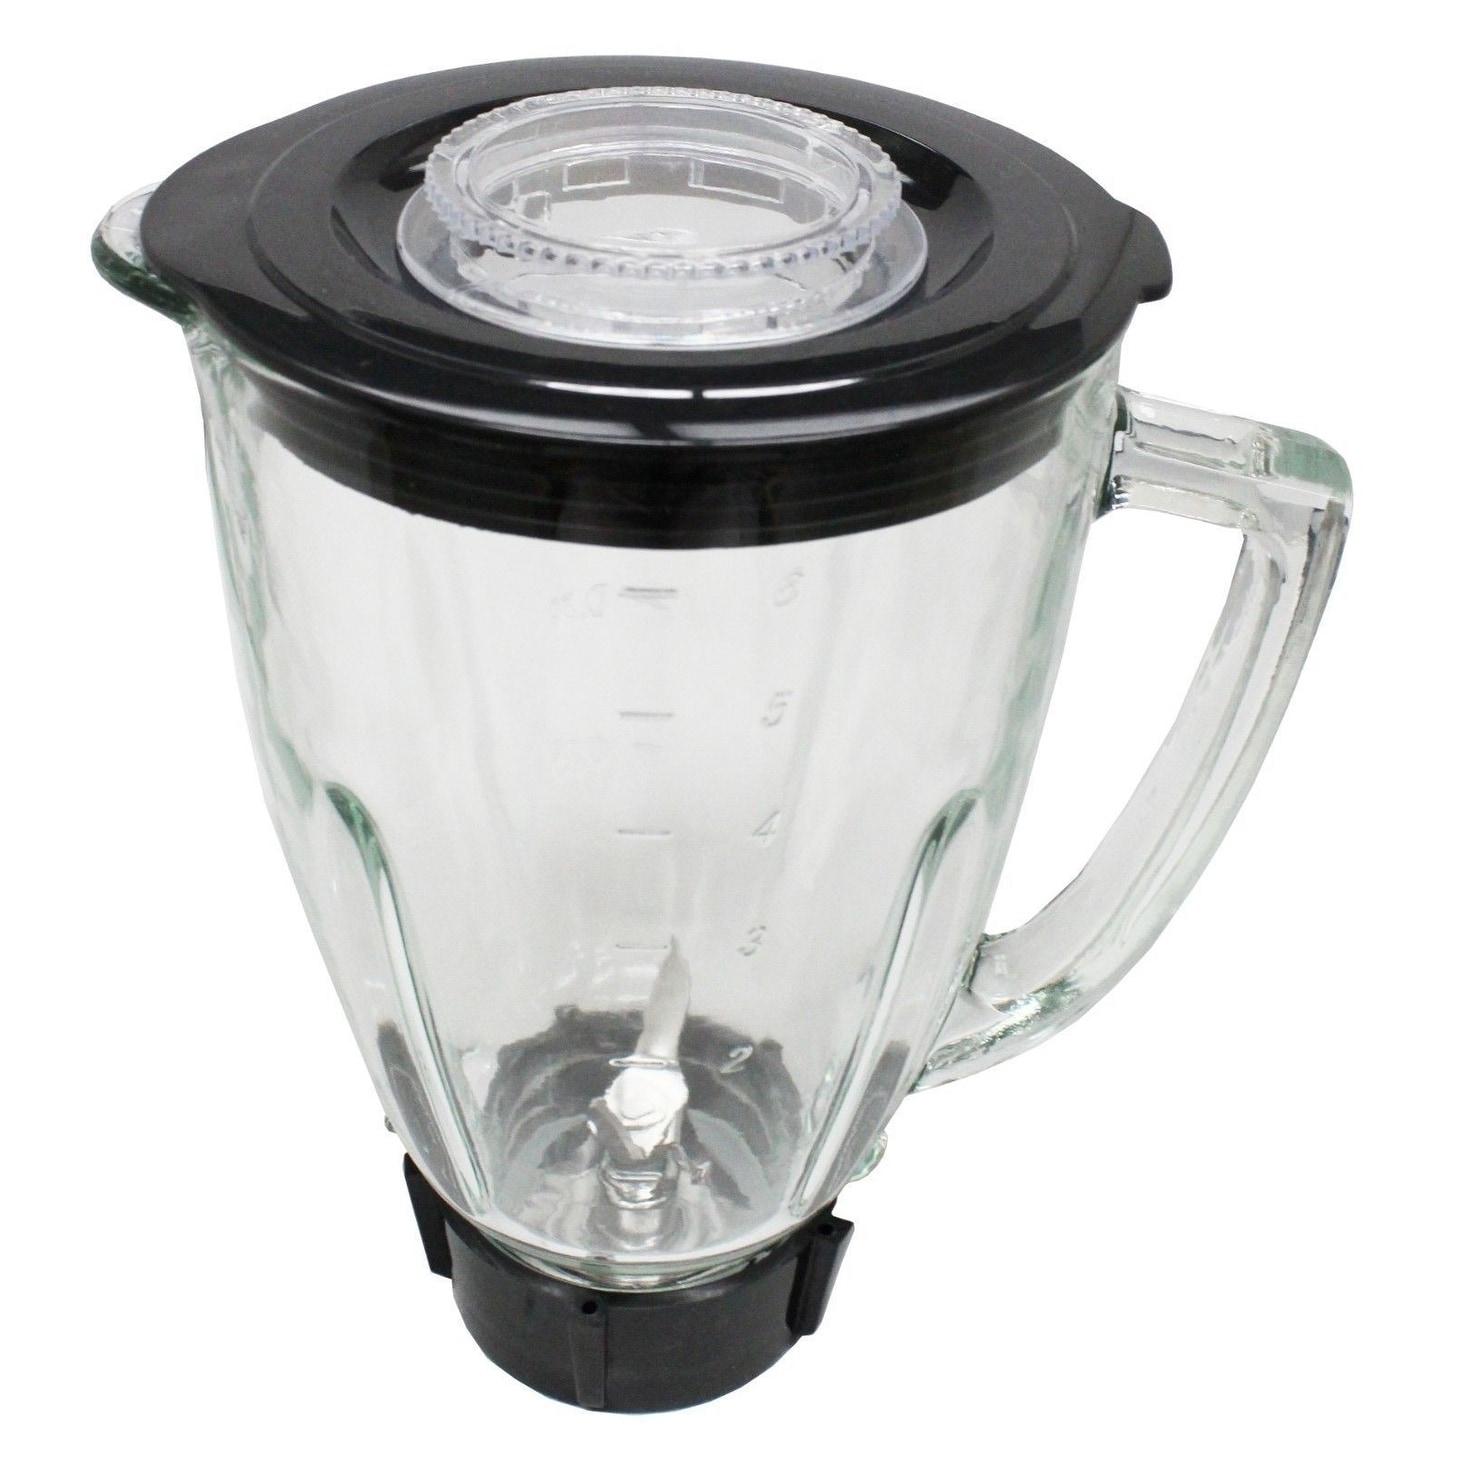 24 oz Cup with Lid, Stainless Steel Blade, Jar Bottom Cap and 2 Gaskets  Replacement Parts Compatible with Oster Pro 1200 Blender 